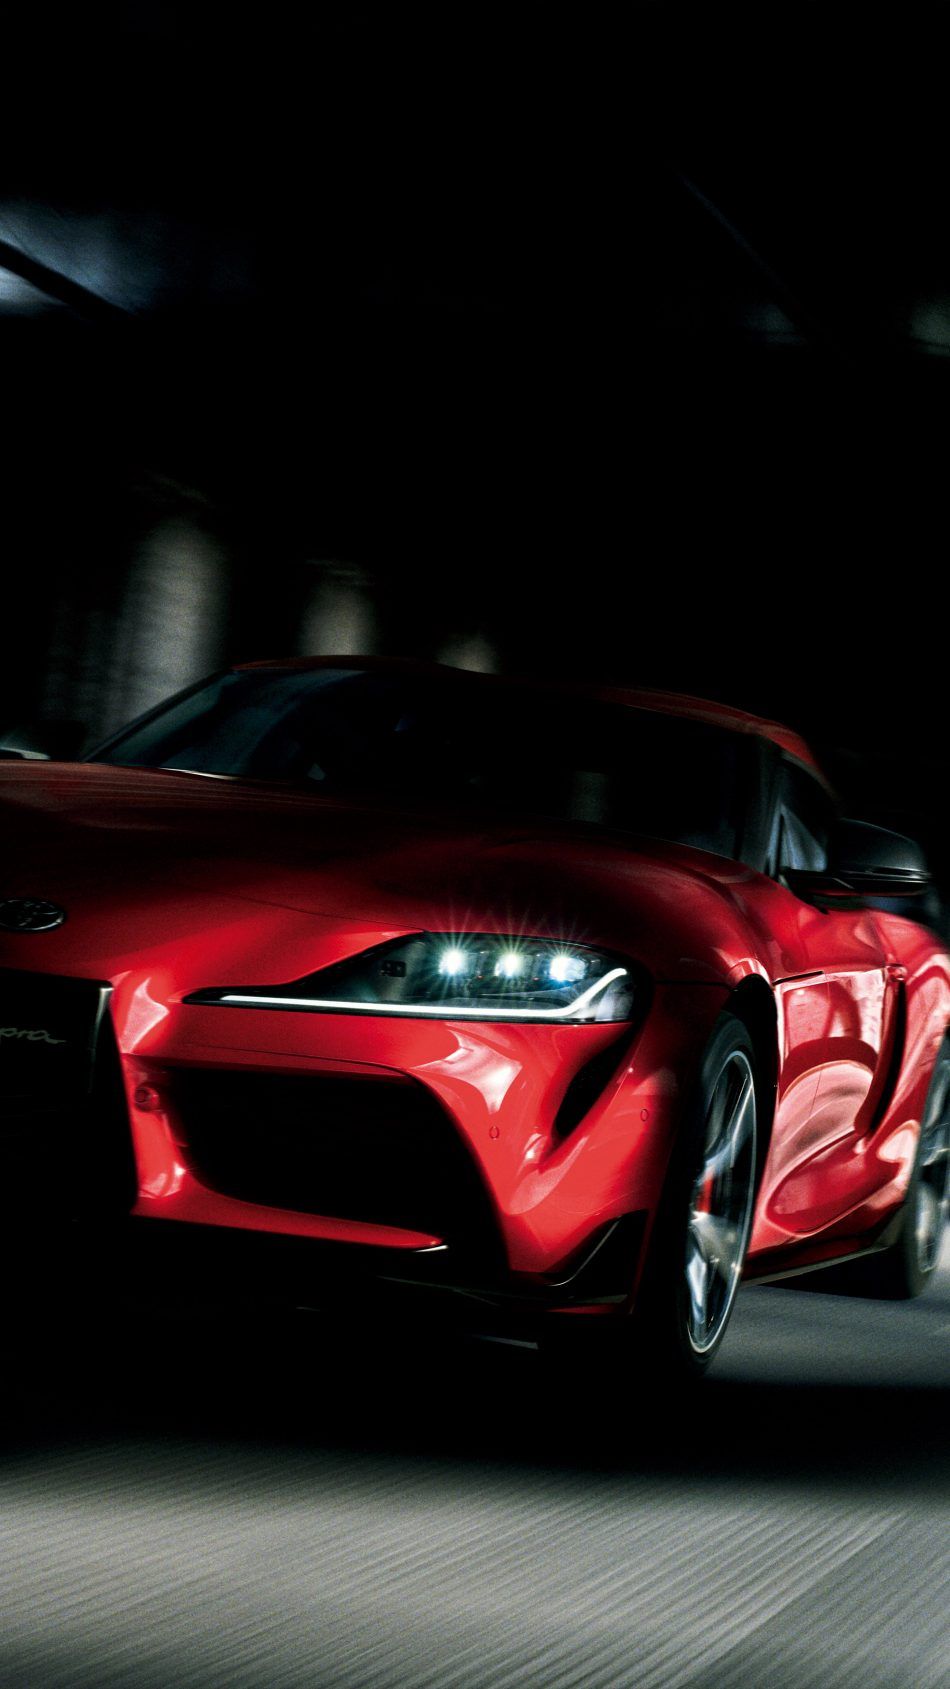 Toyota GR Supra Track Concept 2020 Wallpapers - Wallpaper Cave